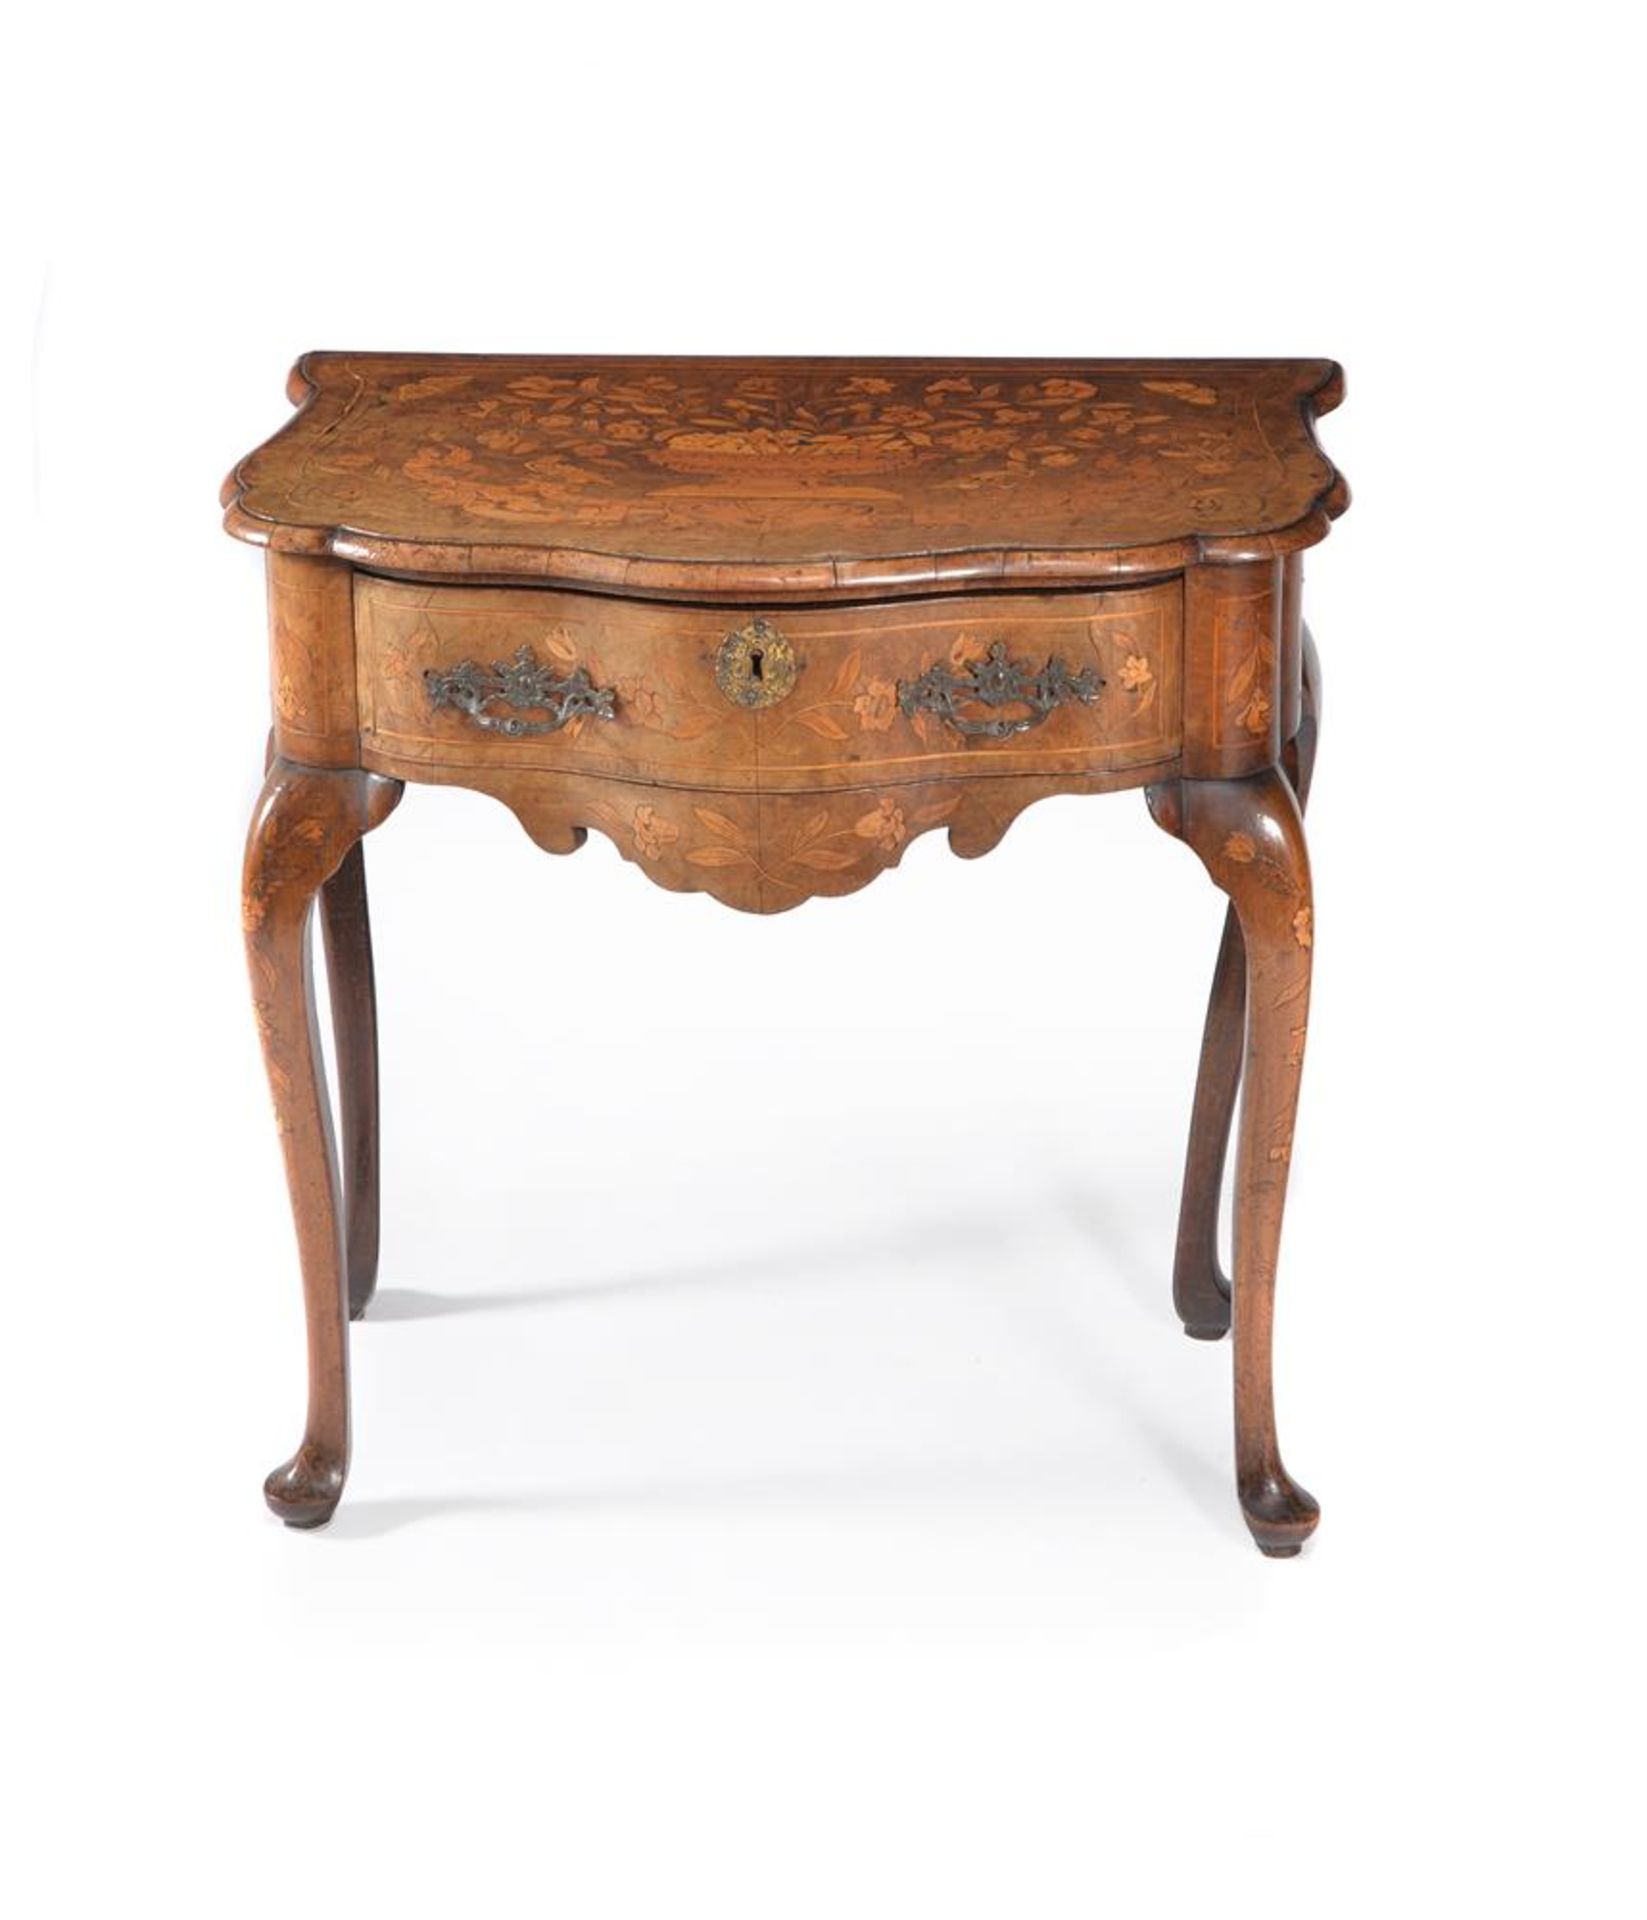 A DUTCH BURR WALNUT AND MARQUETRY SIDE TABLE